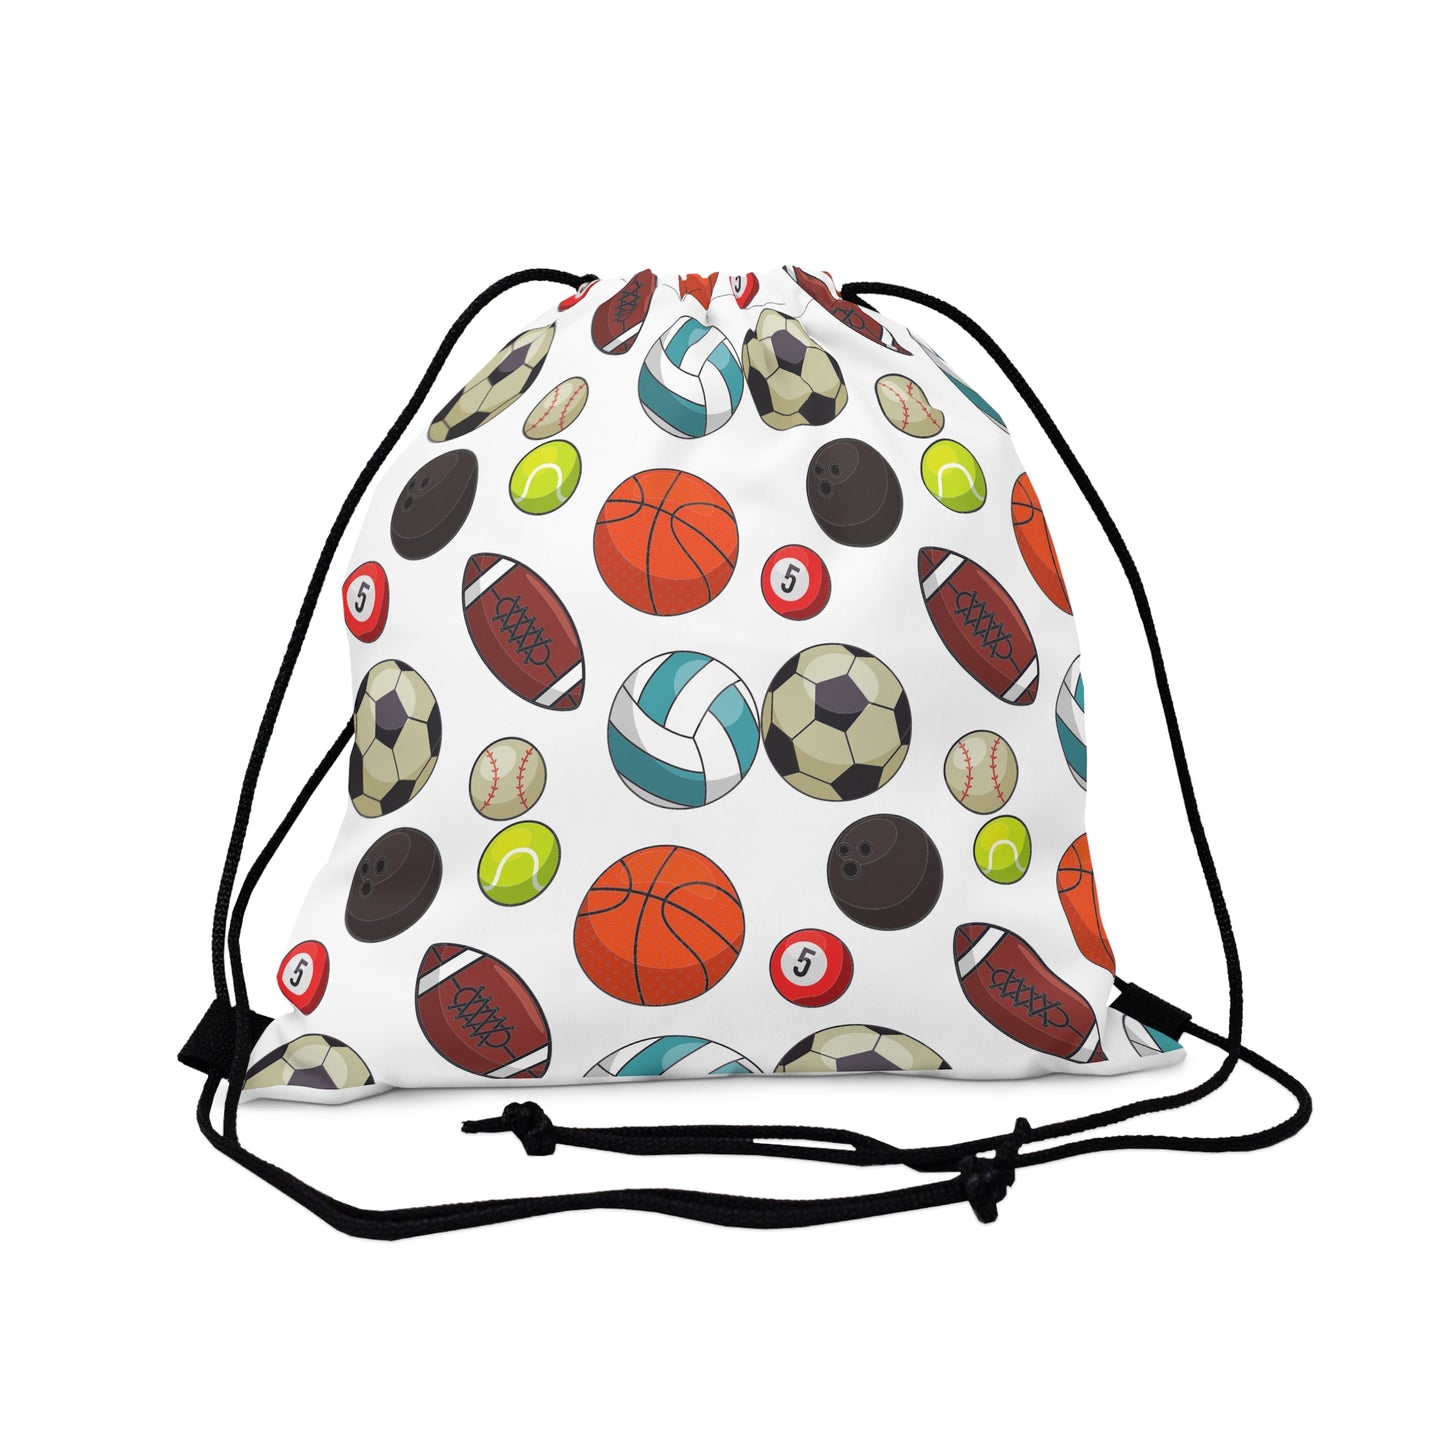 Standing view of the drawstring bag